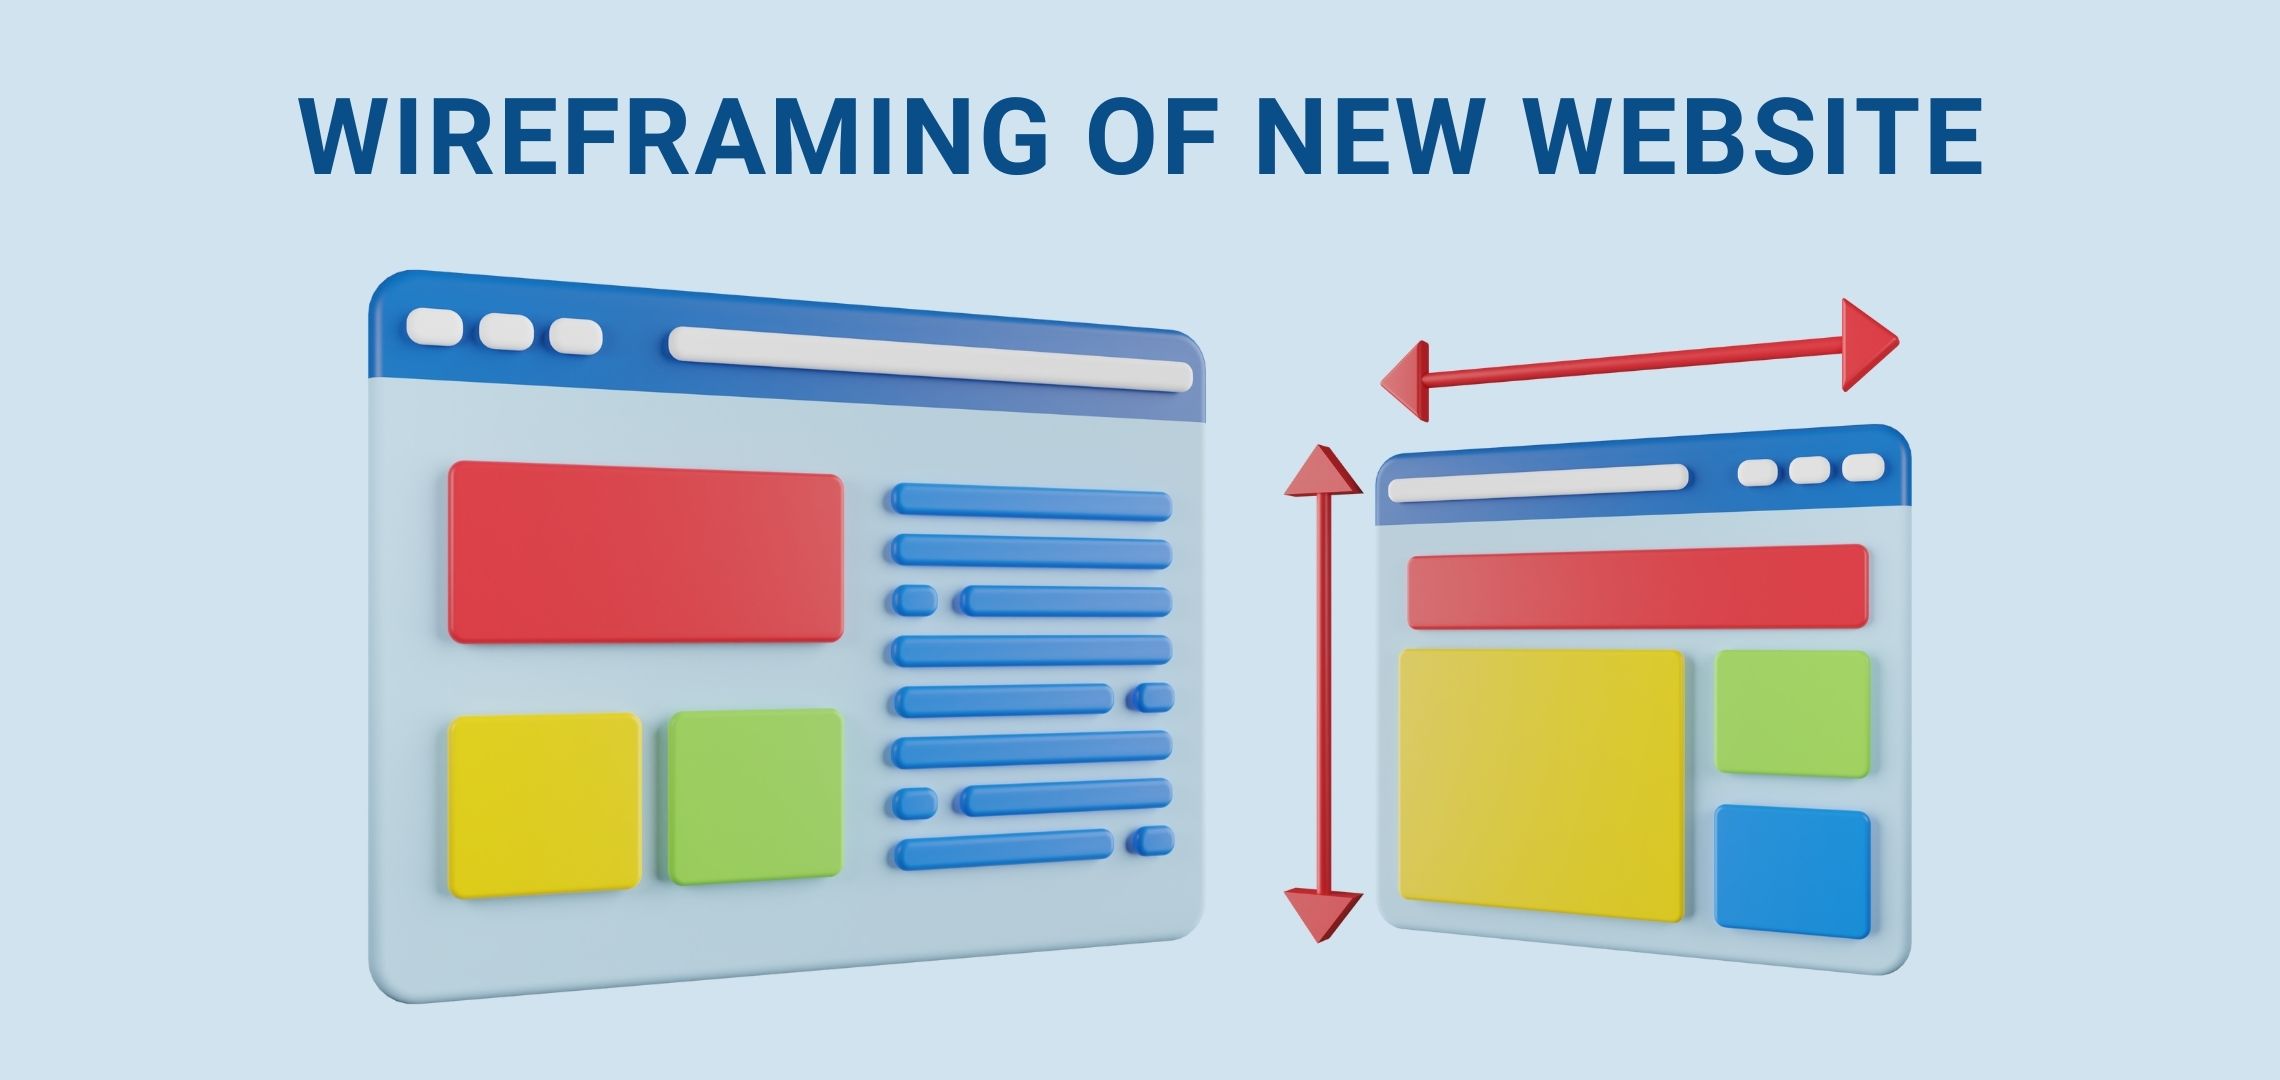 Wireframing Services for a New Website